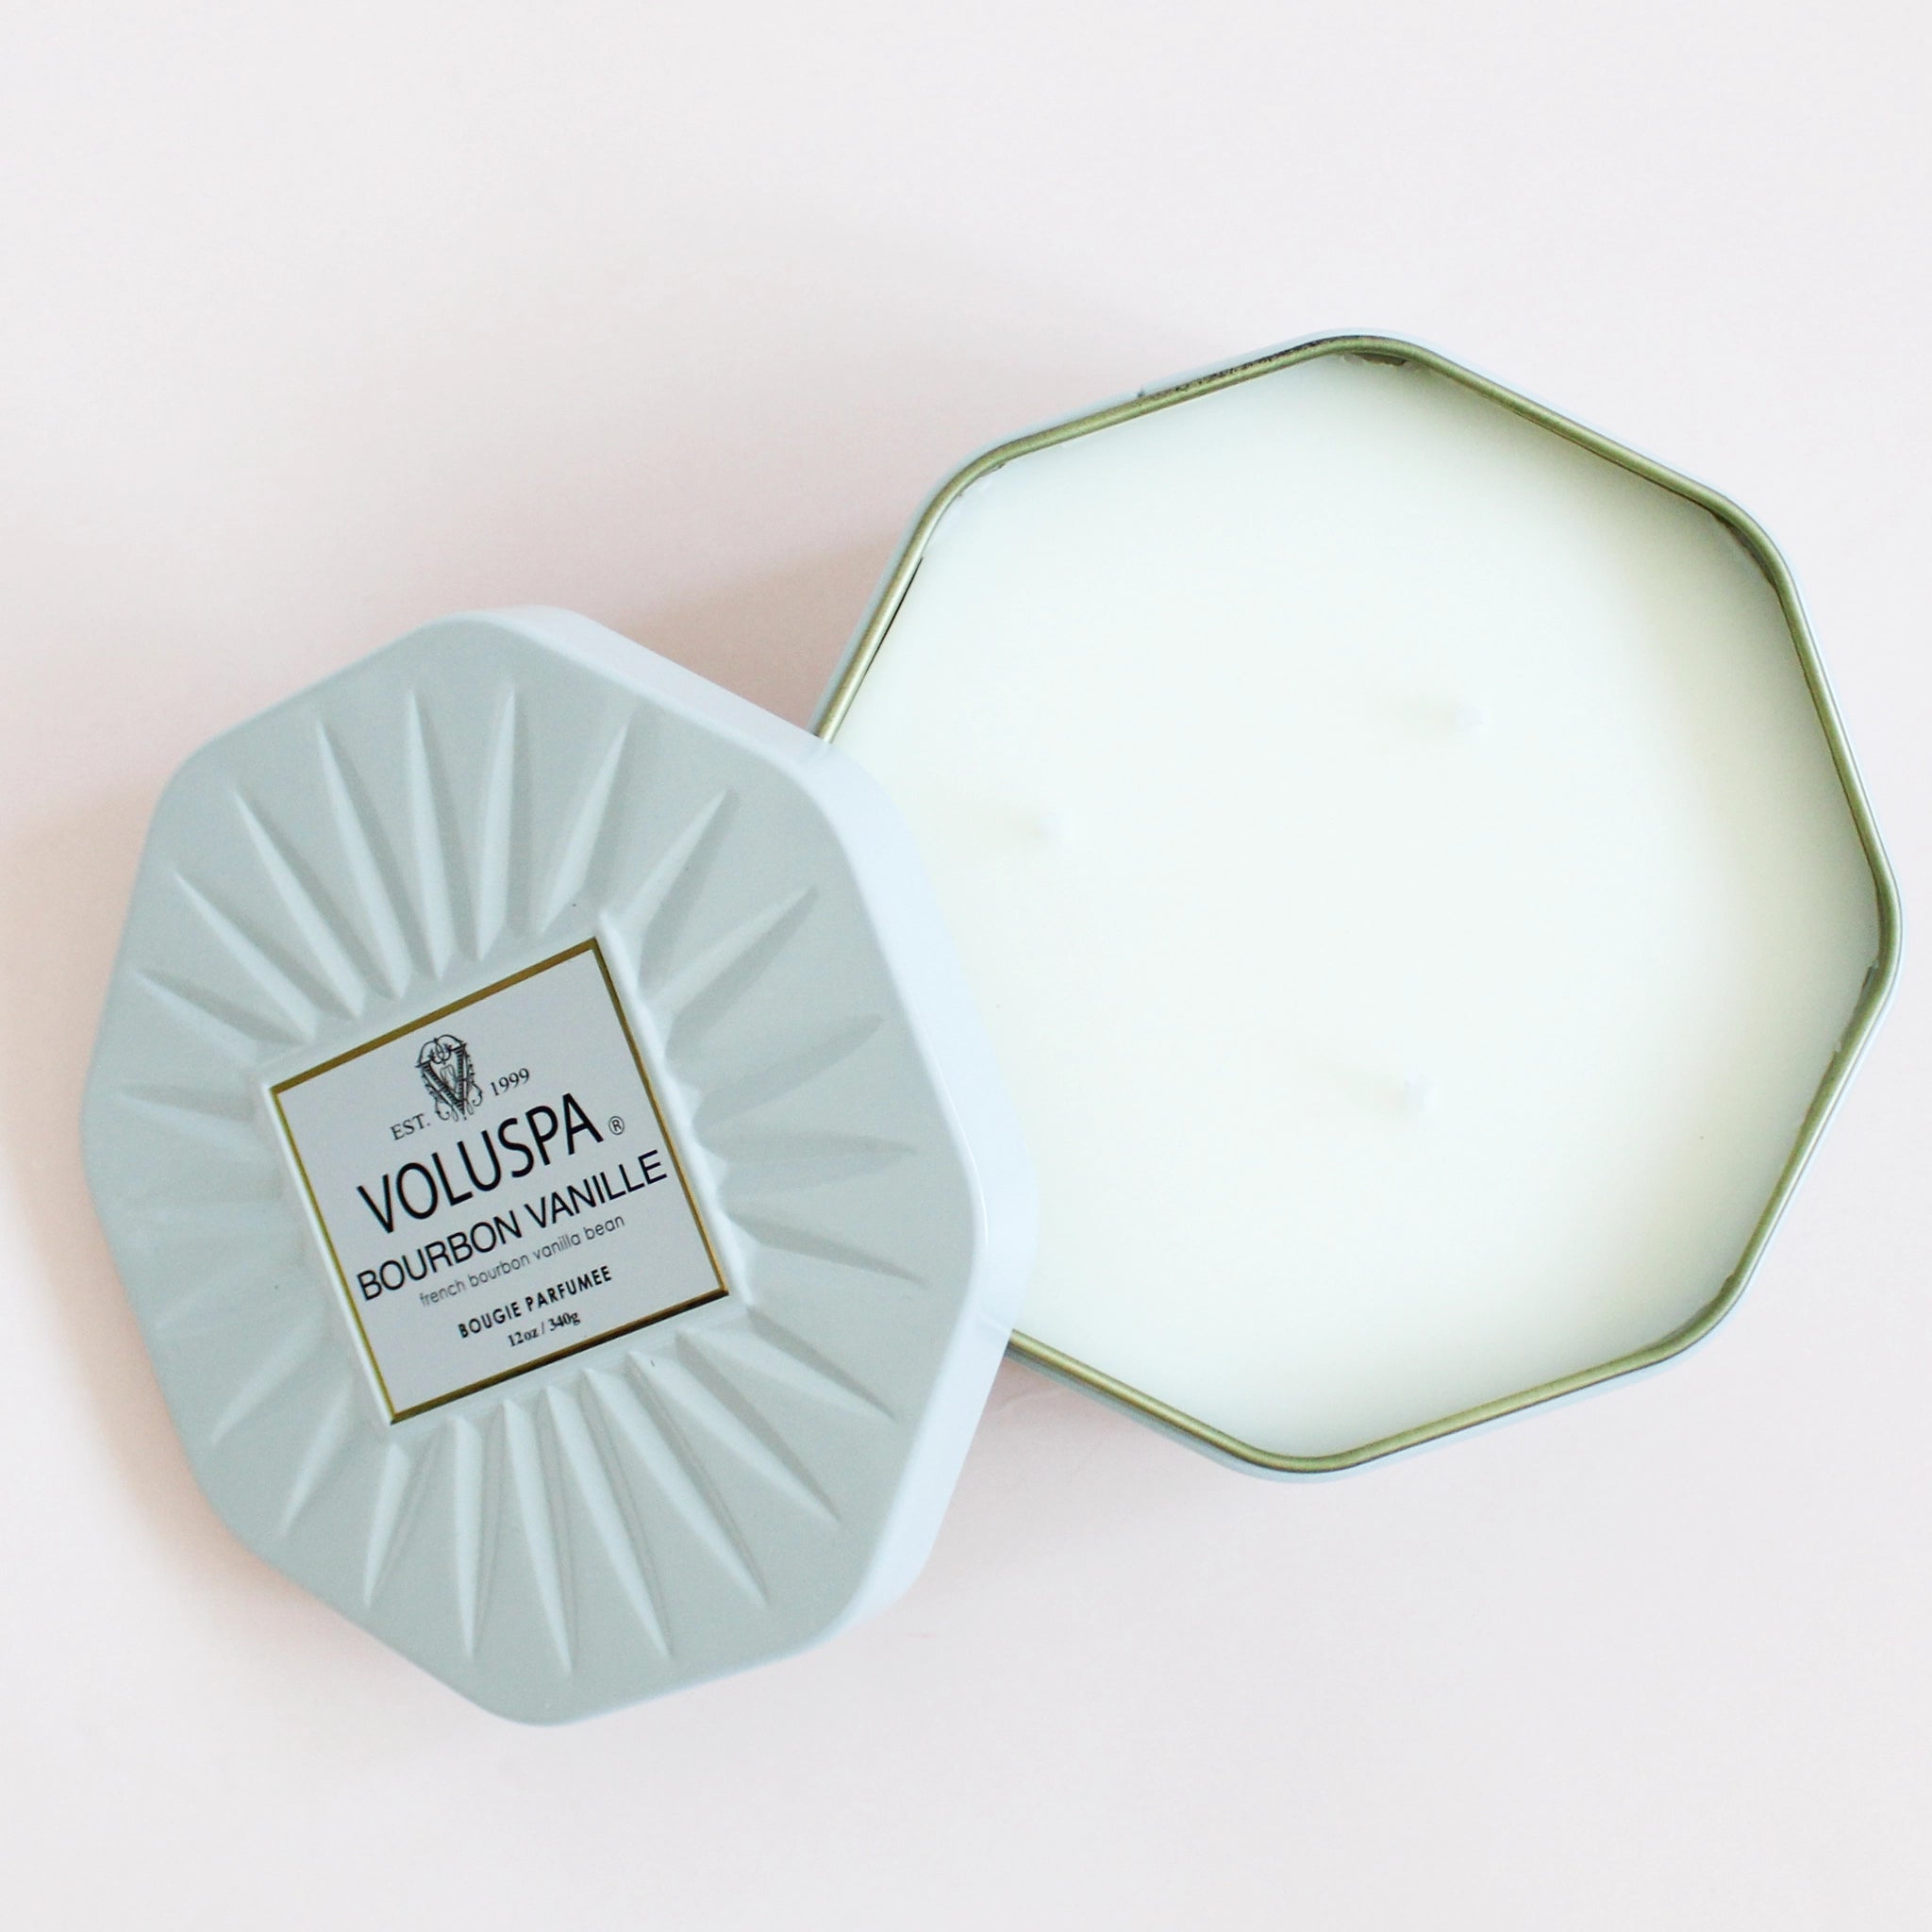 birds eye view of a white octagon shaped candle lies open with the lid off to the side. the lid reads voluspa bourbon vanille. french bourbon vanilla bean scent.